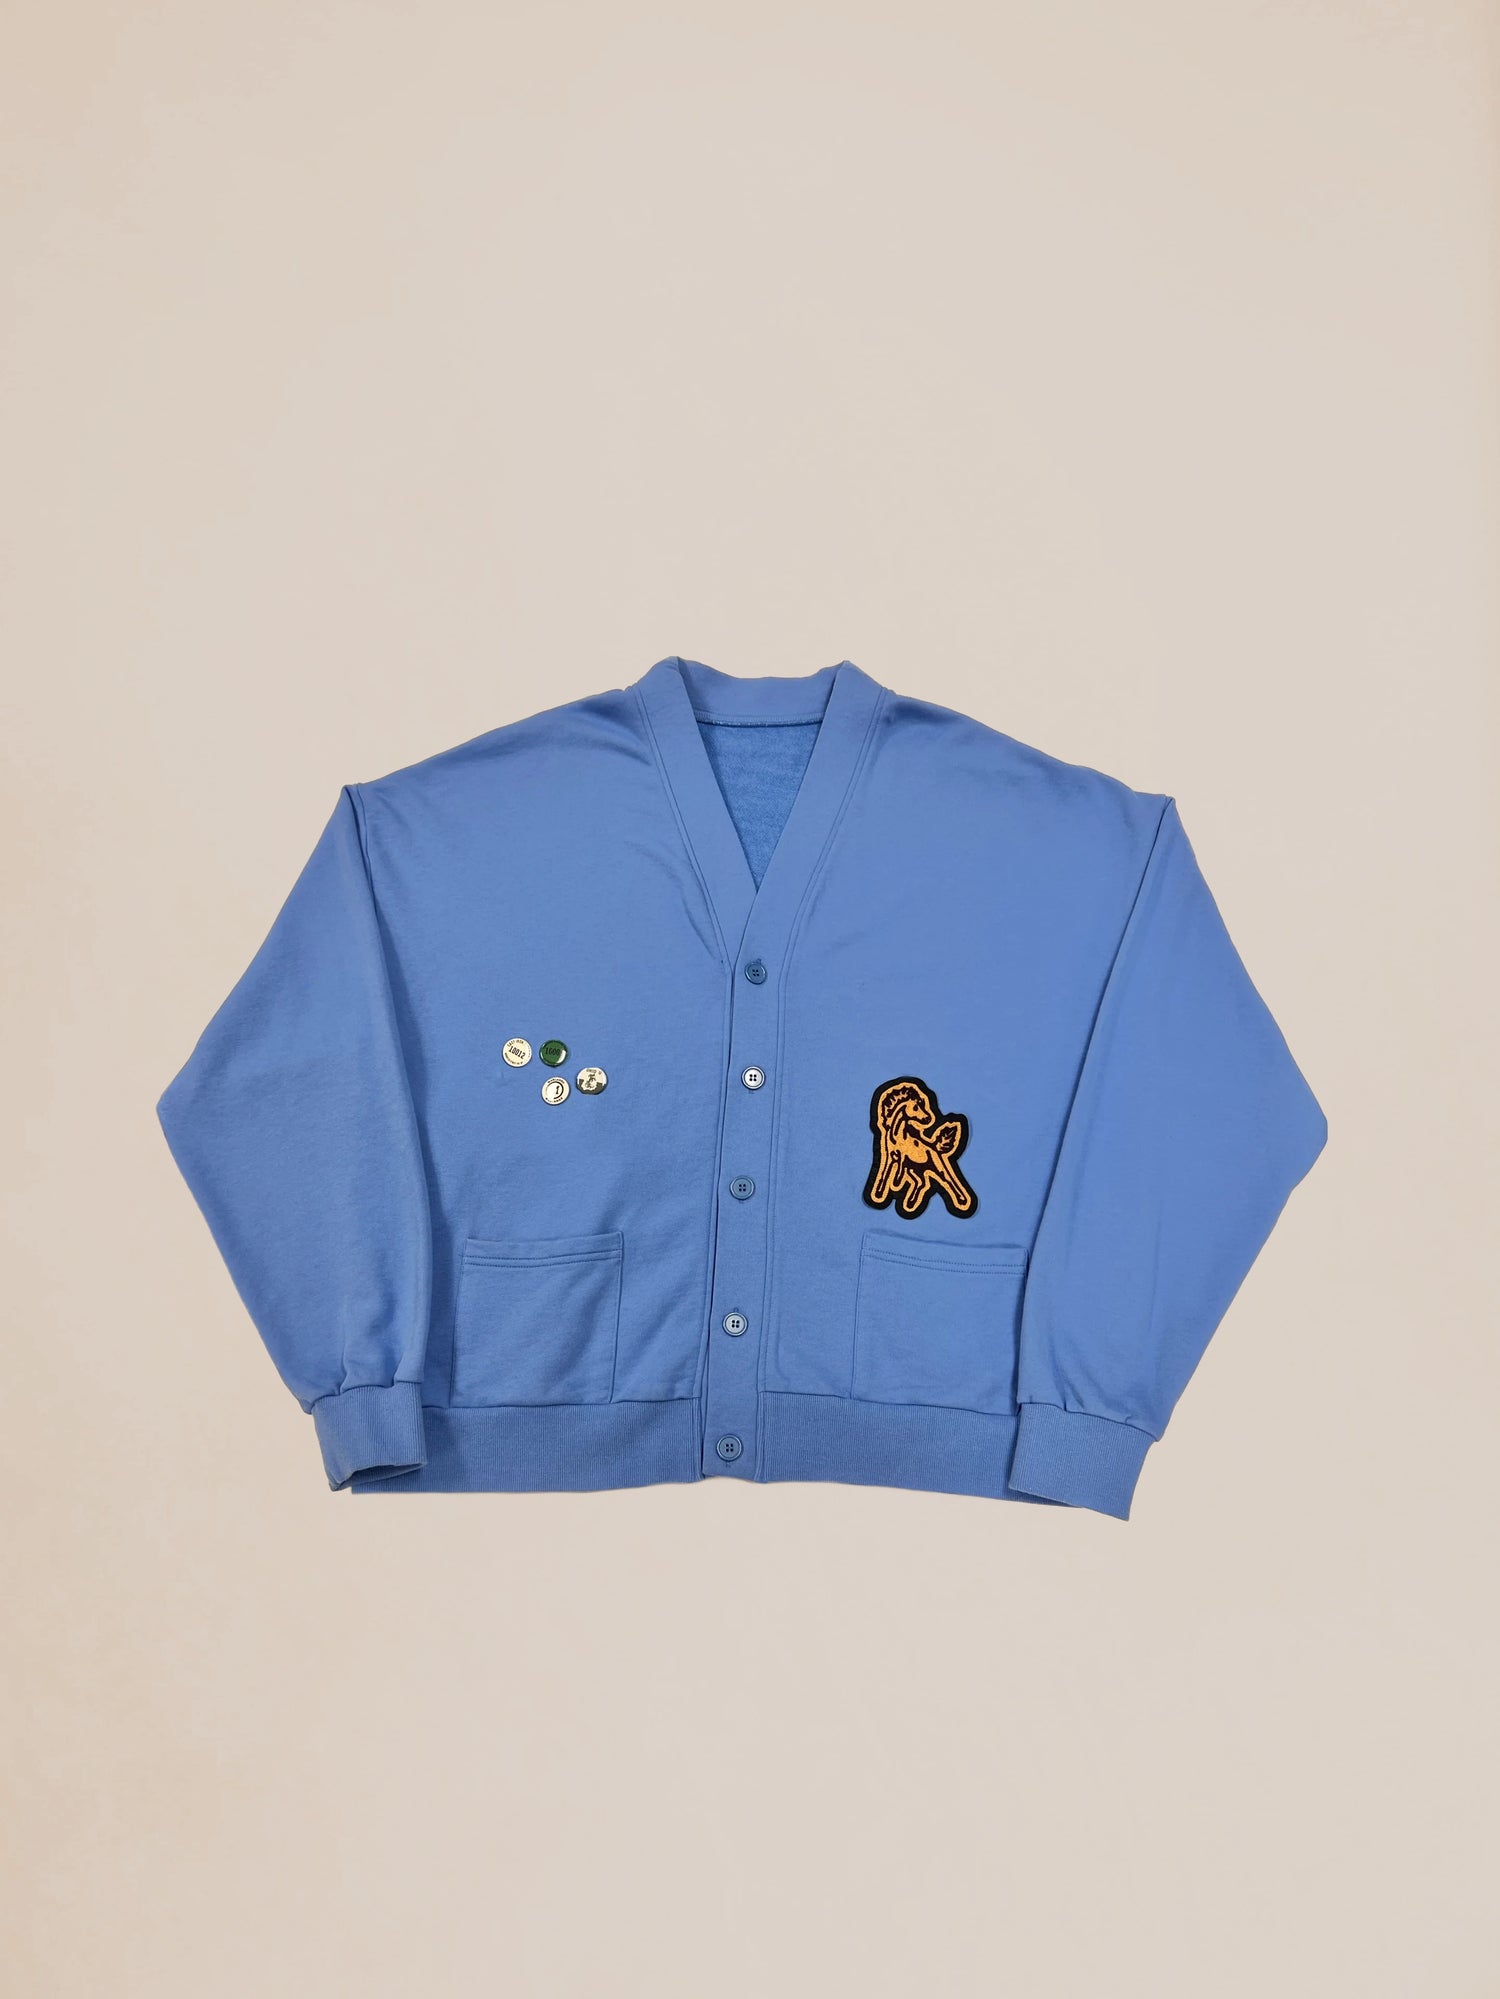 Blue Profound Sample 44 varsity patch cardigan with patches displayed on a neutral background.